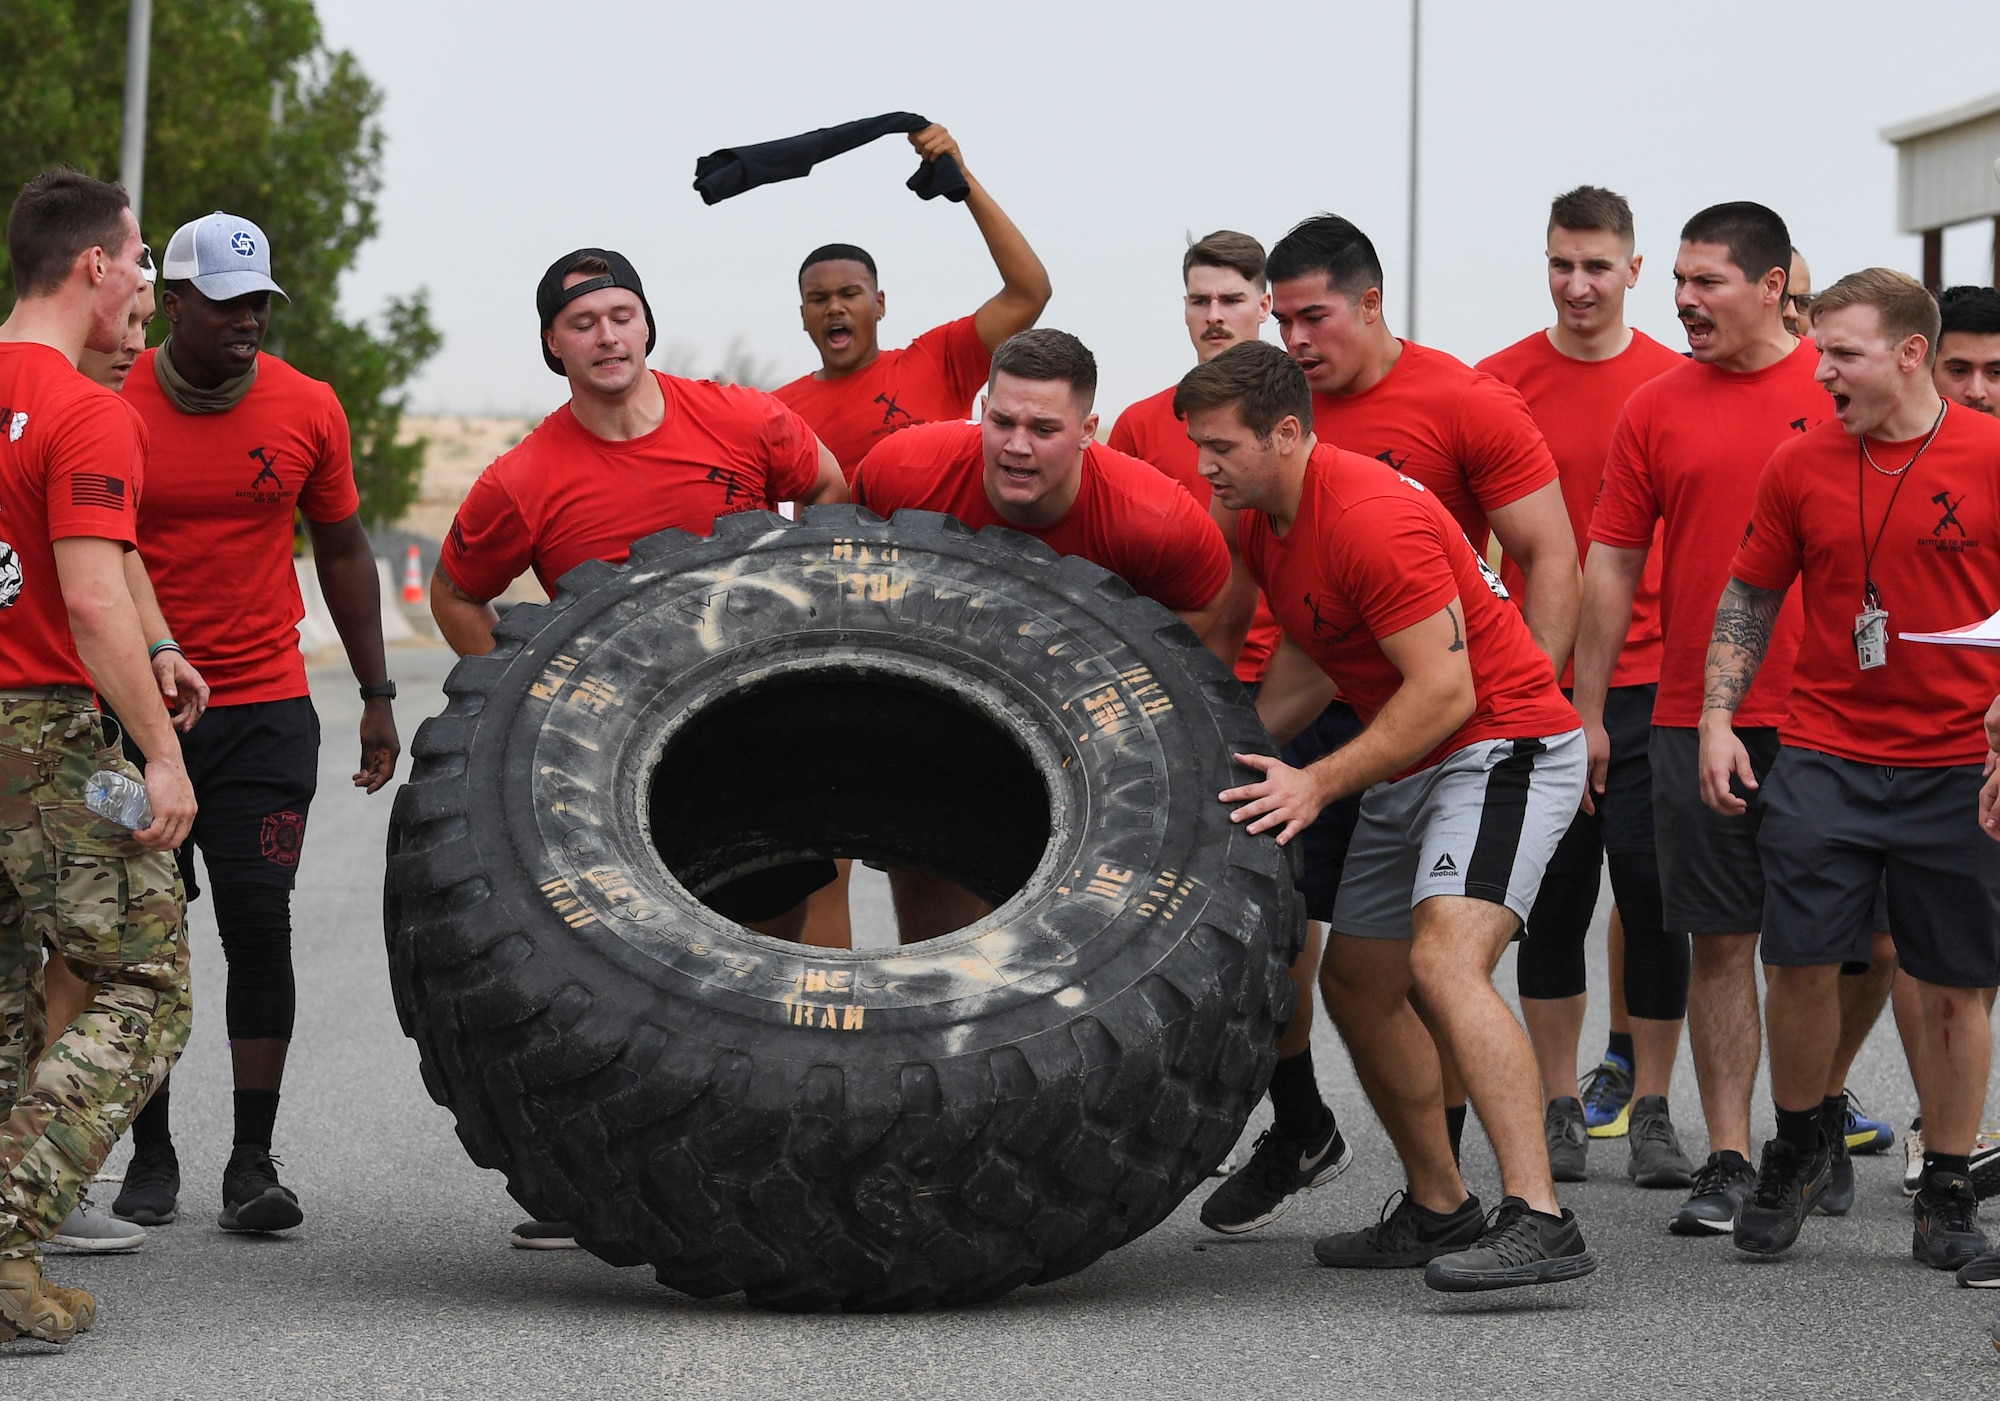 U.S. Air Force Airmen assigned to the 407th Expeditionary Civil Engineer Squadron flip a tire during the Battle of the Badges event at Ahmed Al Jaber Air Base, Kuwait, Nov. 11, 2020.